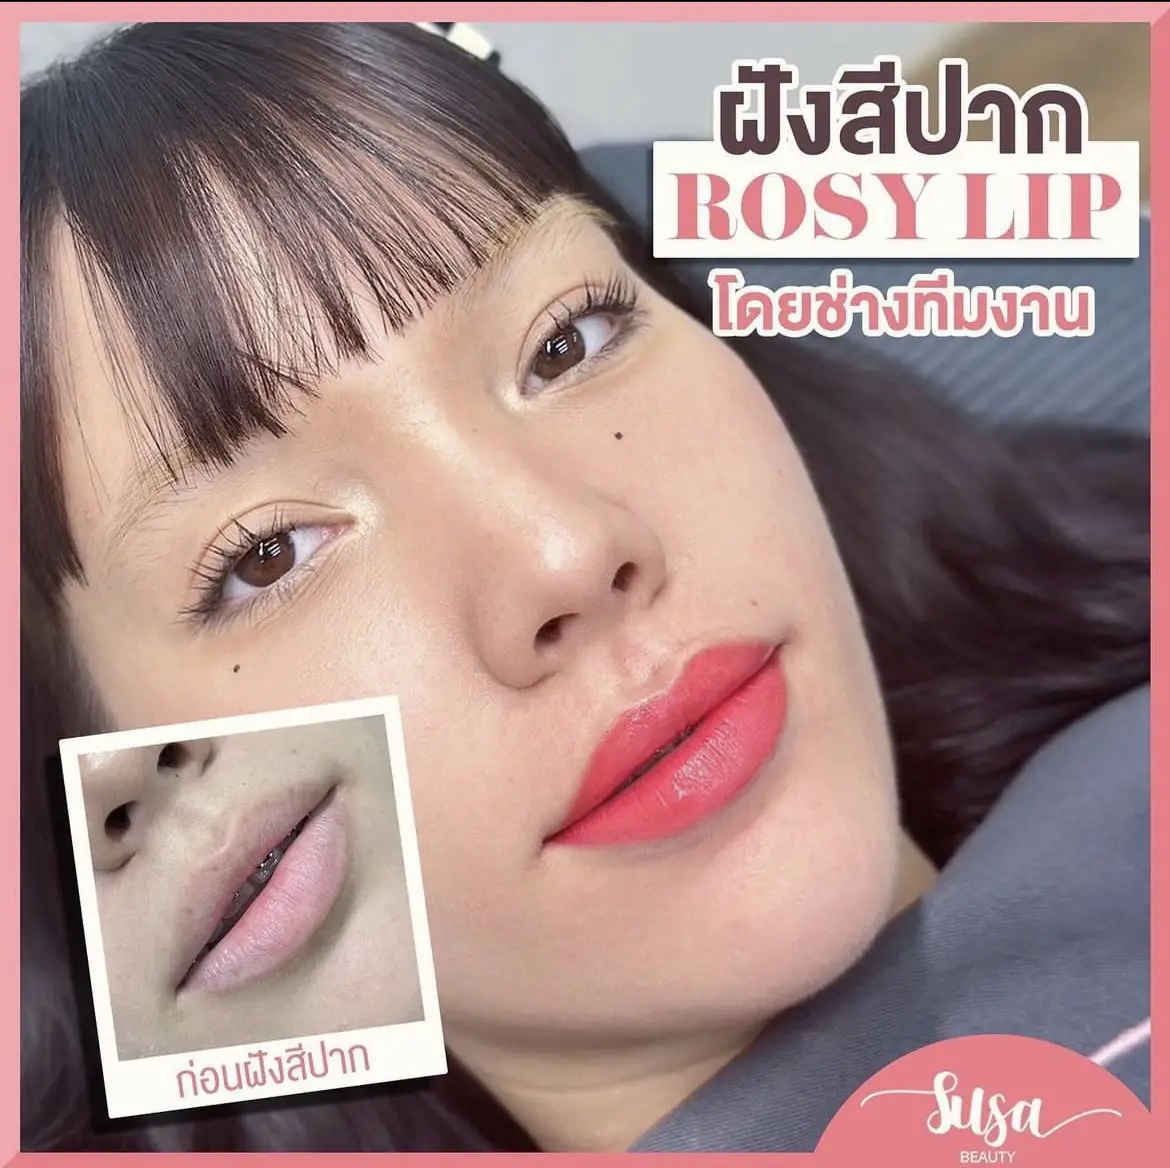 Rose lip 💋, Gallery posted by Susa beauty